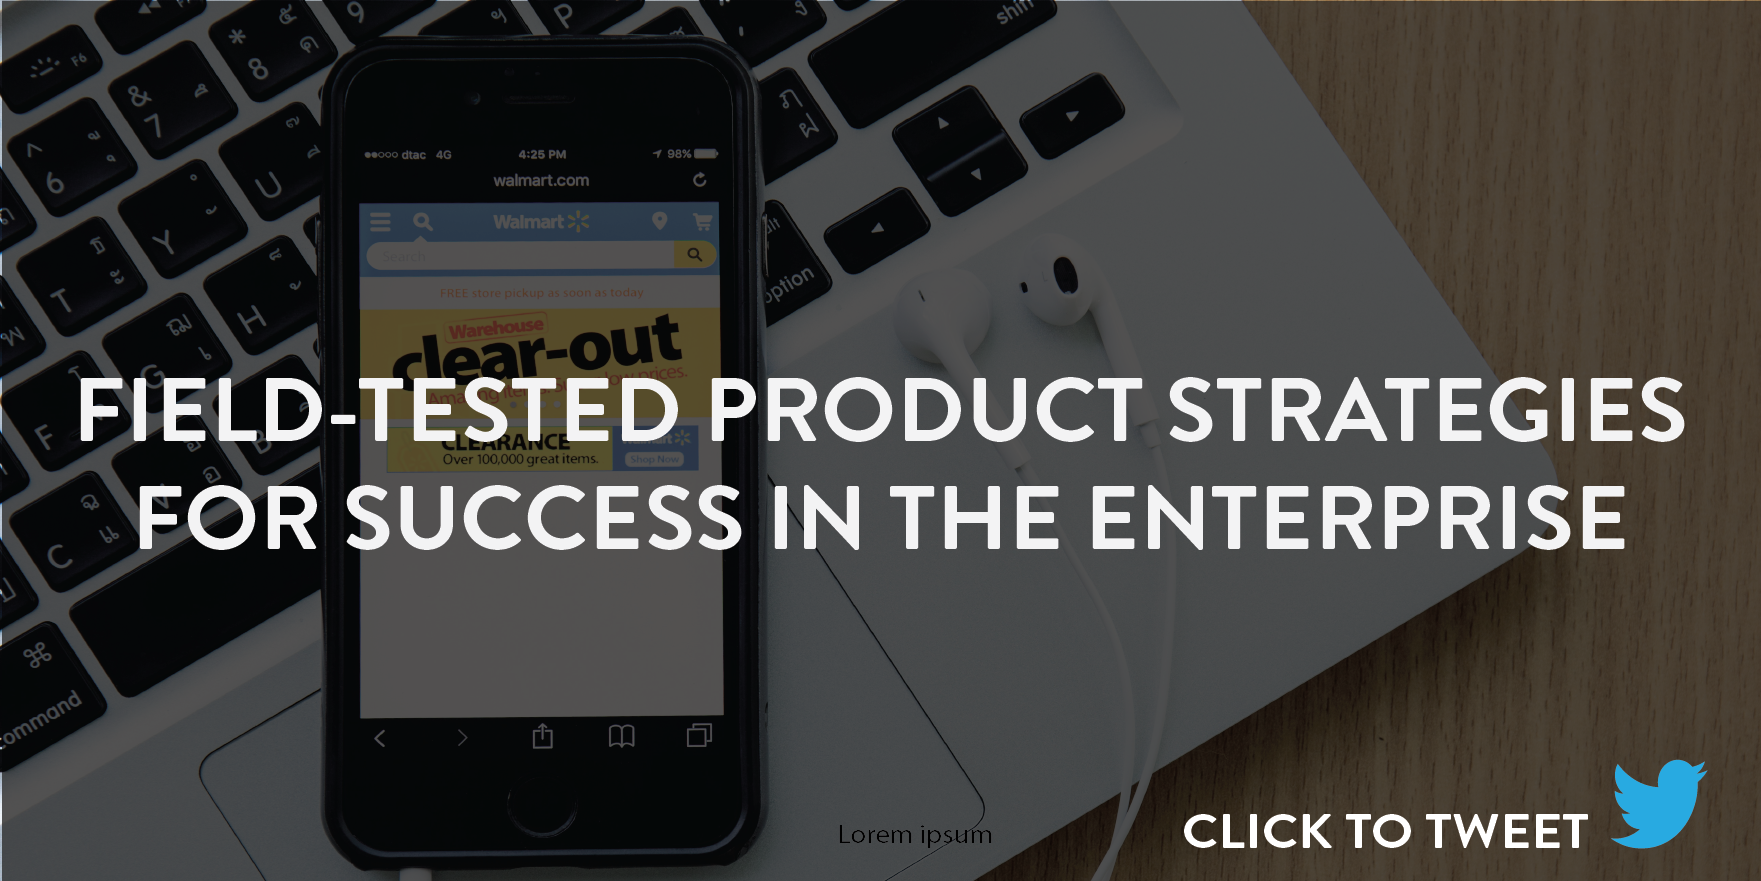 From consultant to head of product, here’s what it takes to see success in the enterprise